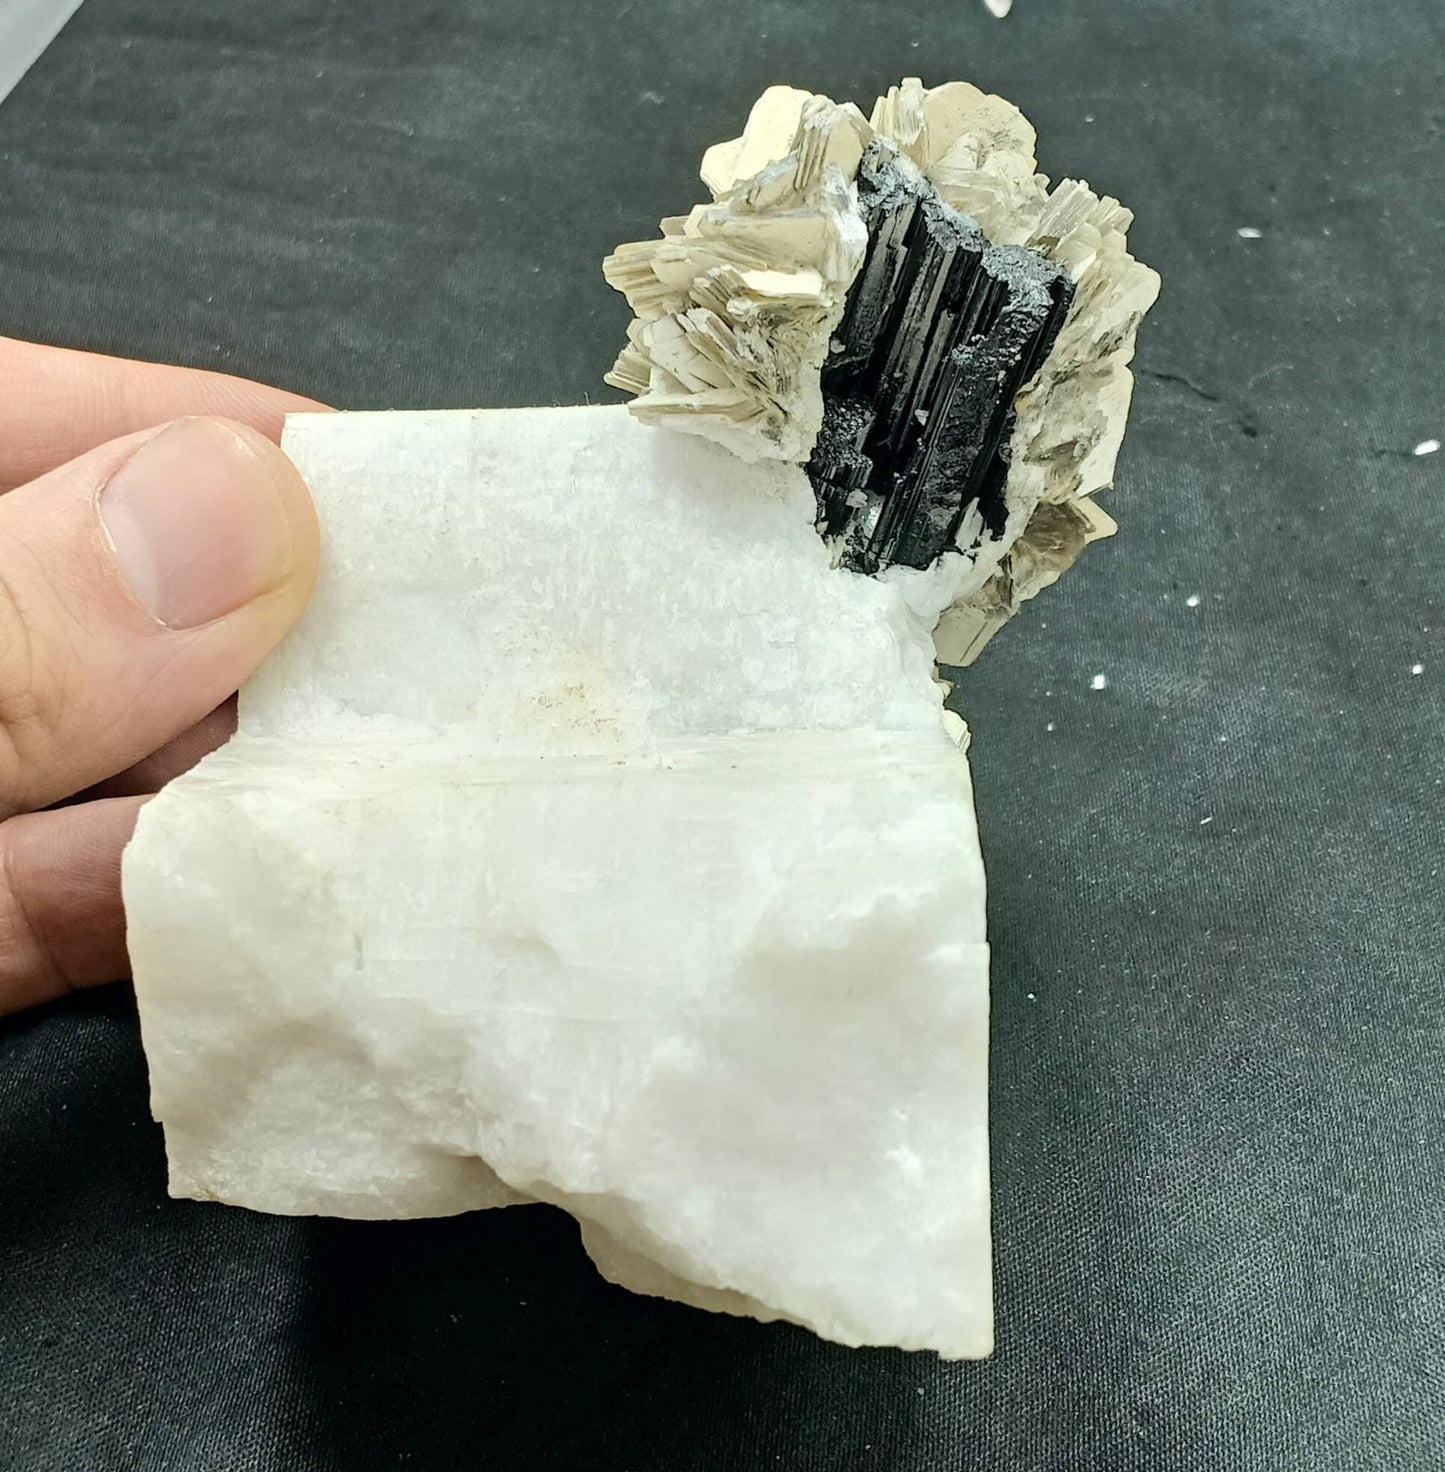 An Aesthetic Natural specimen of combination of Albite, etched Schorl, and Muscovite 498 grams